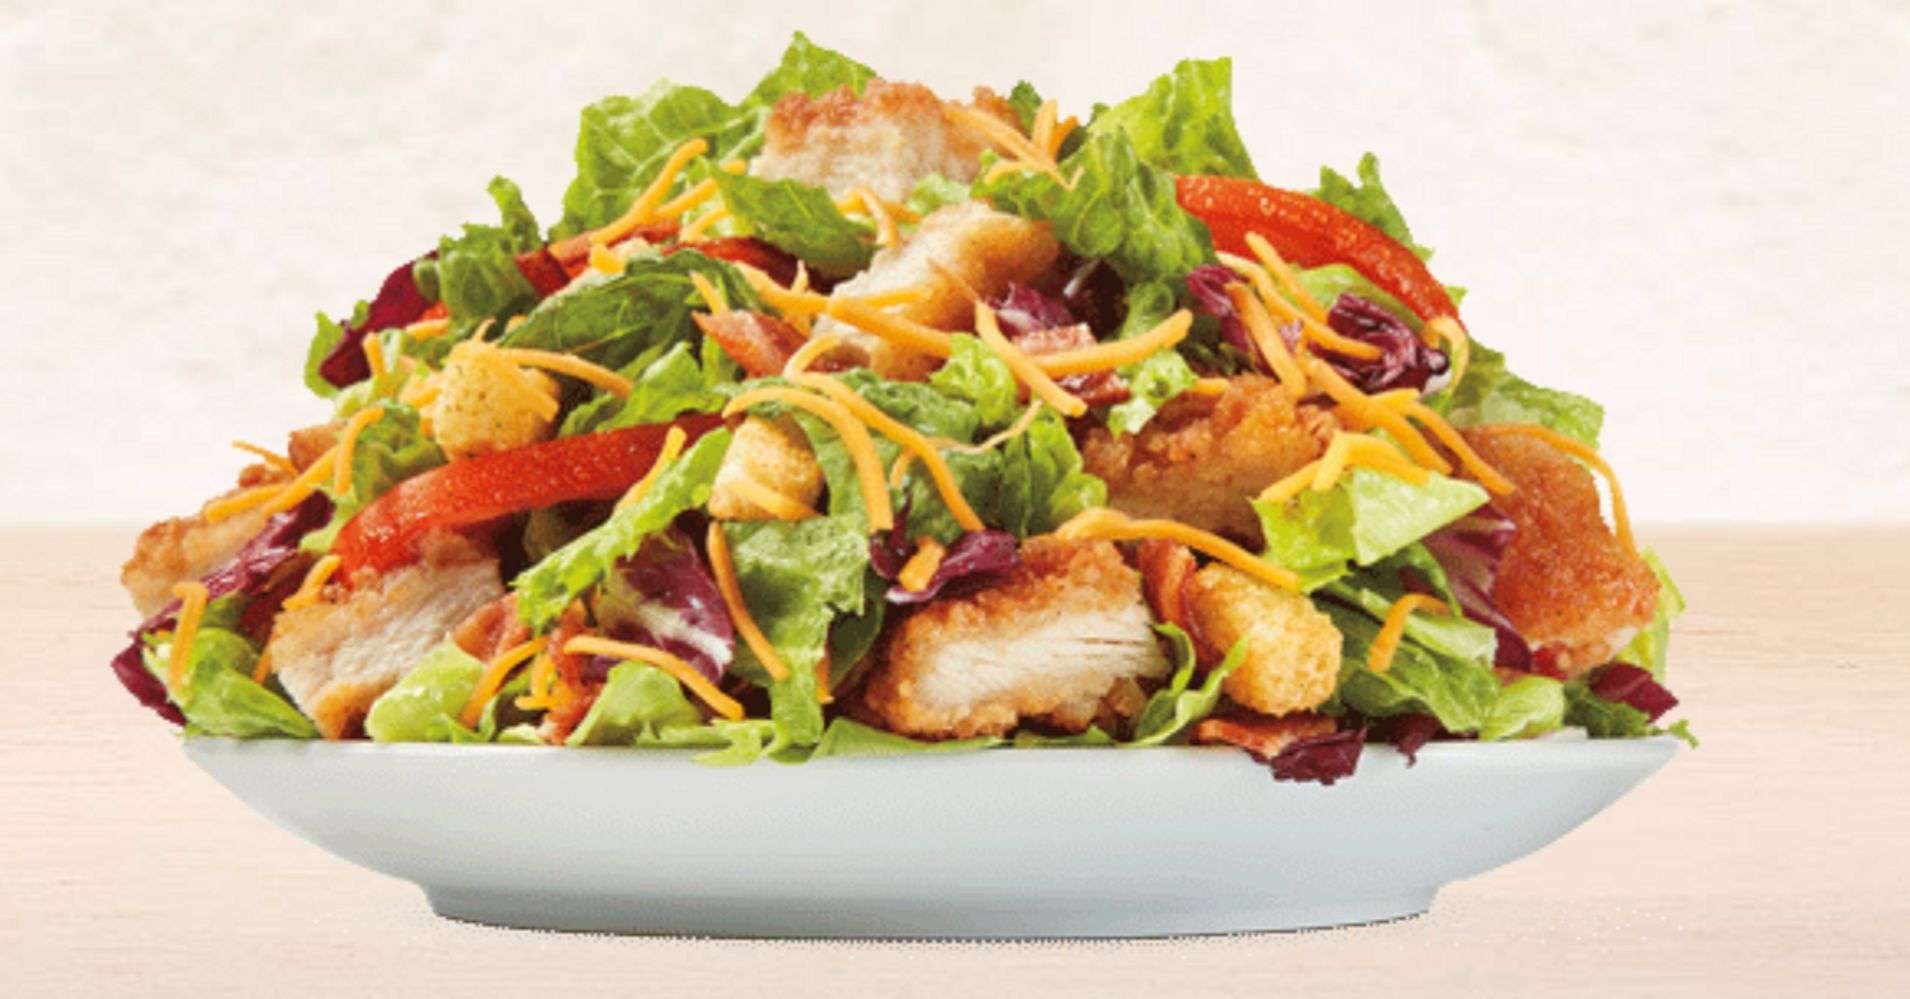 The Best Fast Food Salads, According To Nutritionists ...